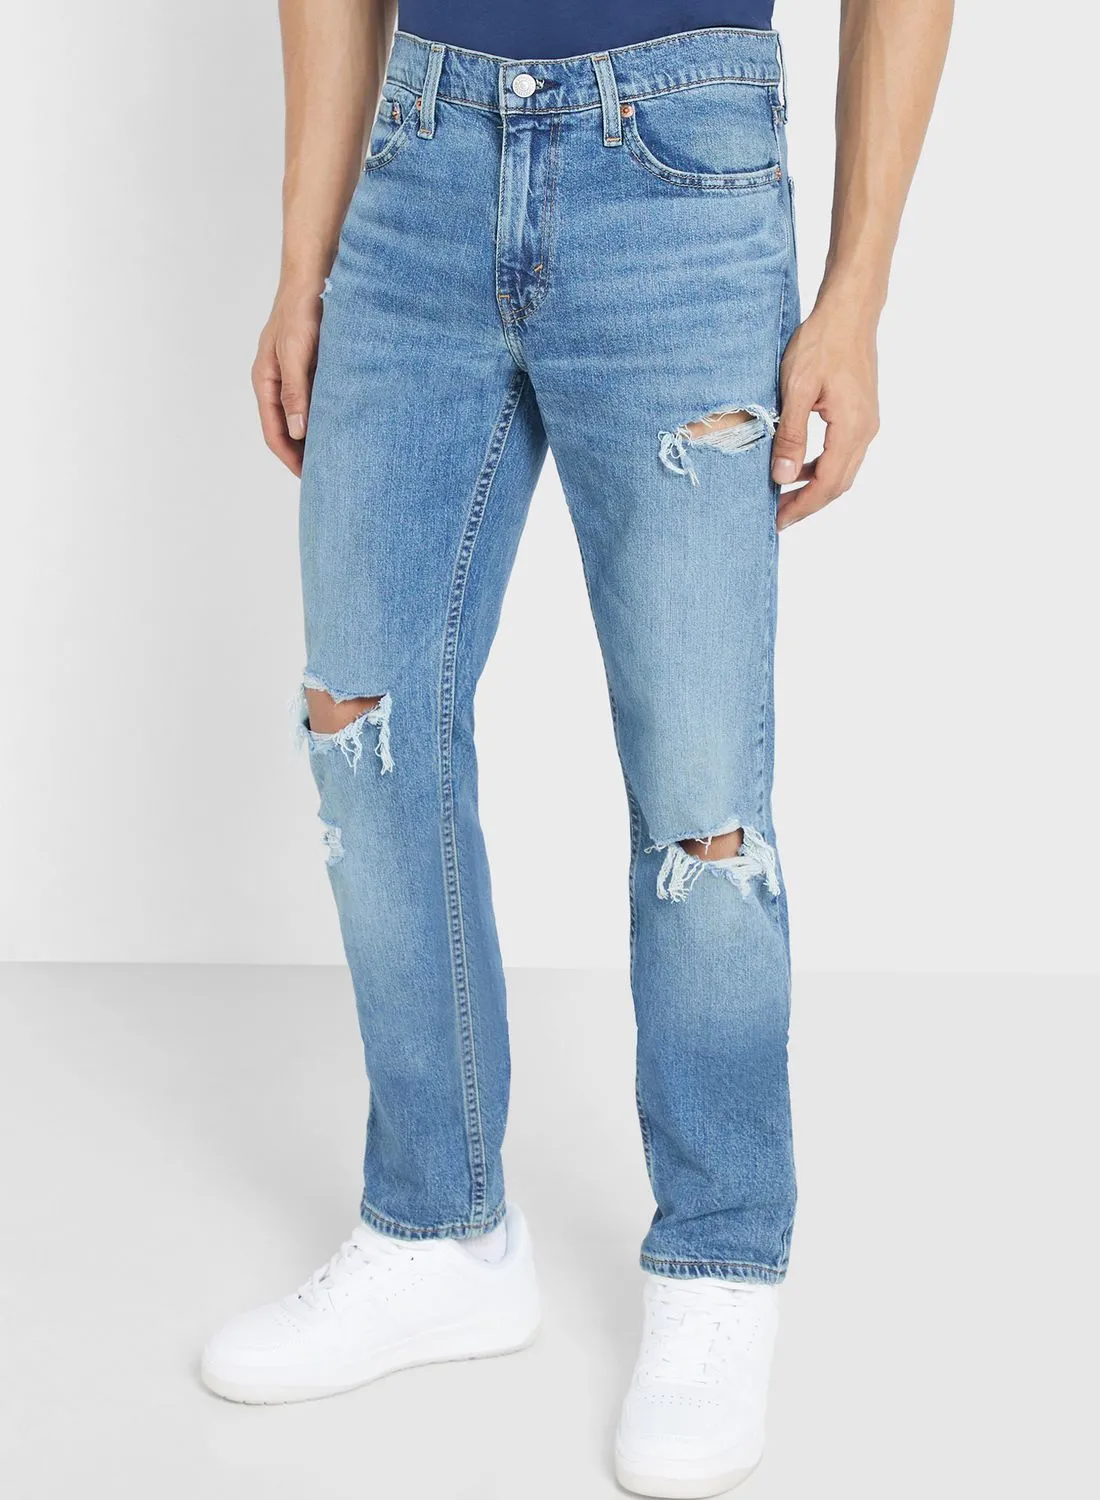 Levi's Light Wash Relaxed Fit Jeans